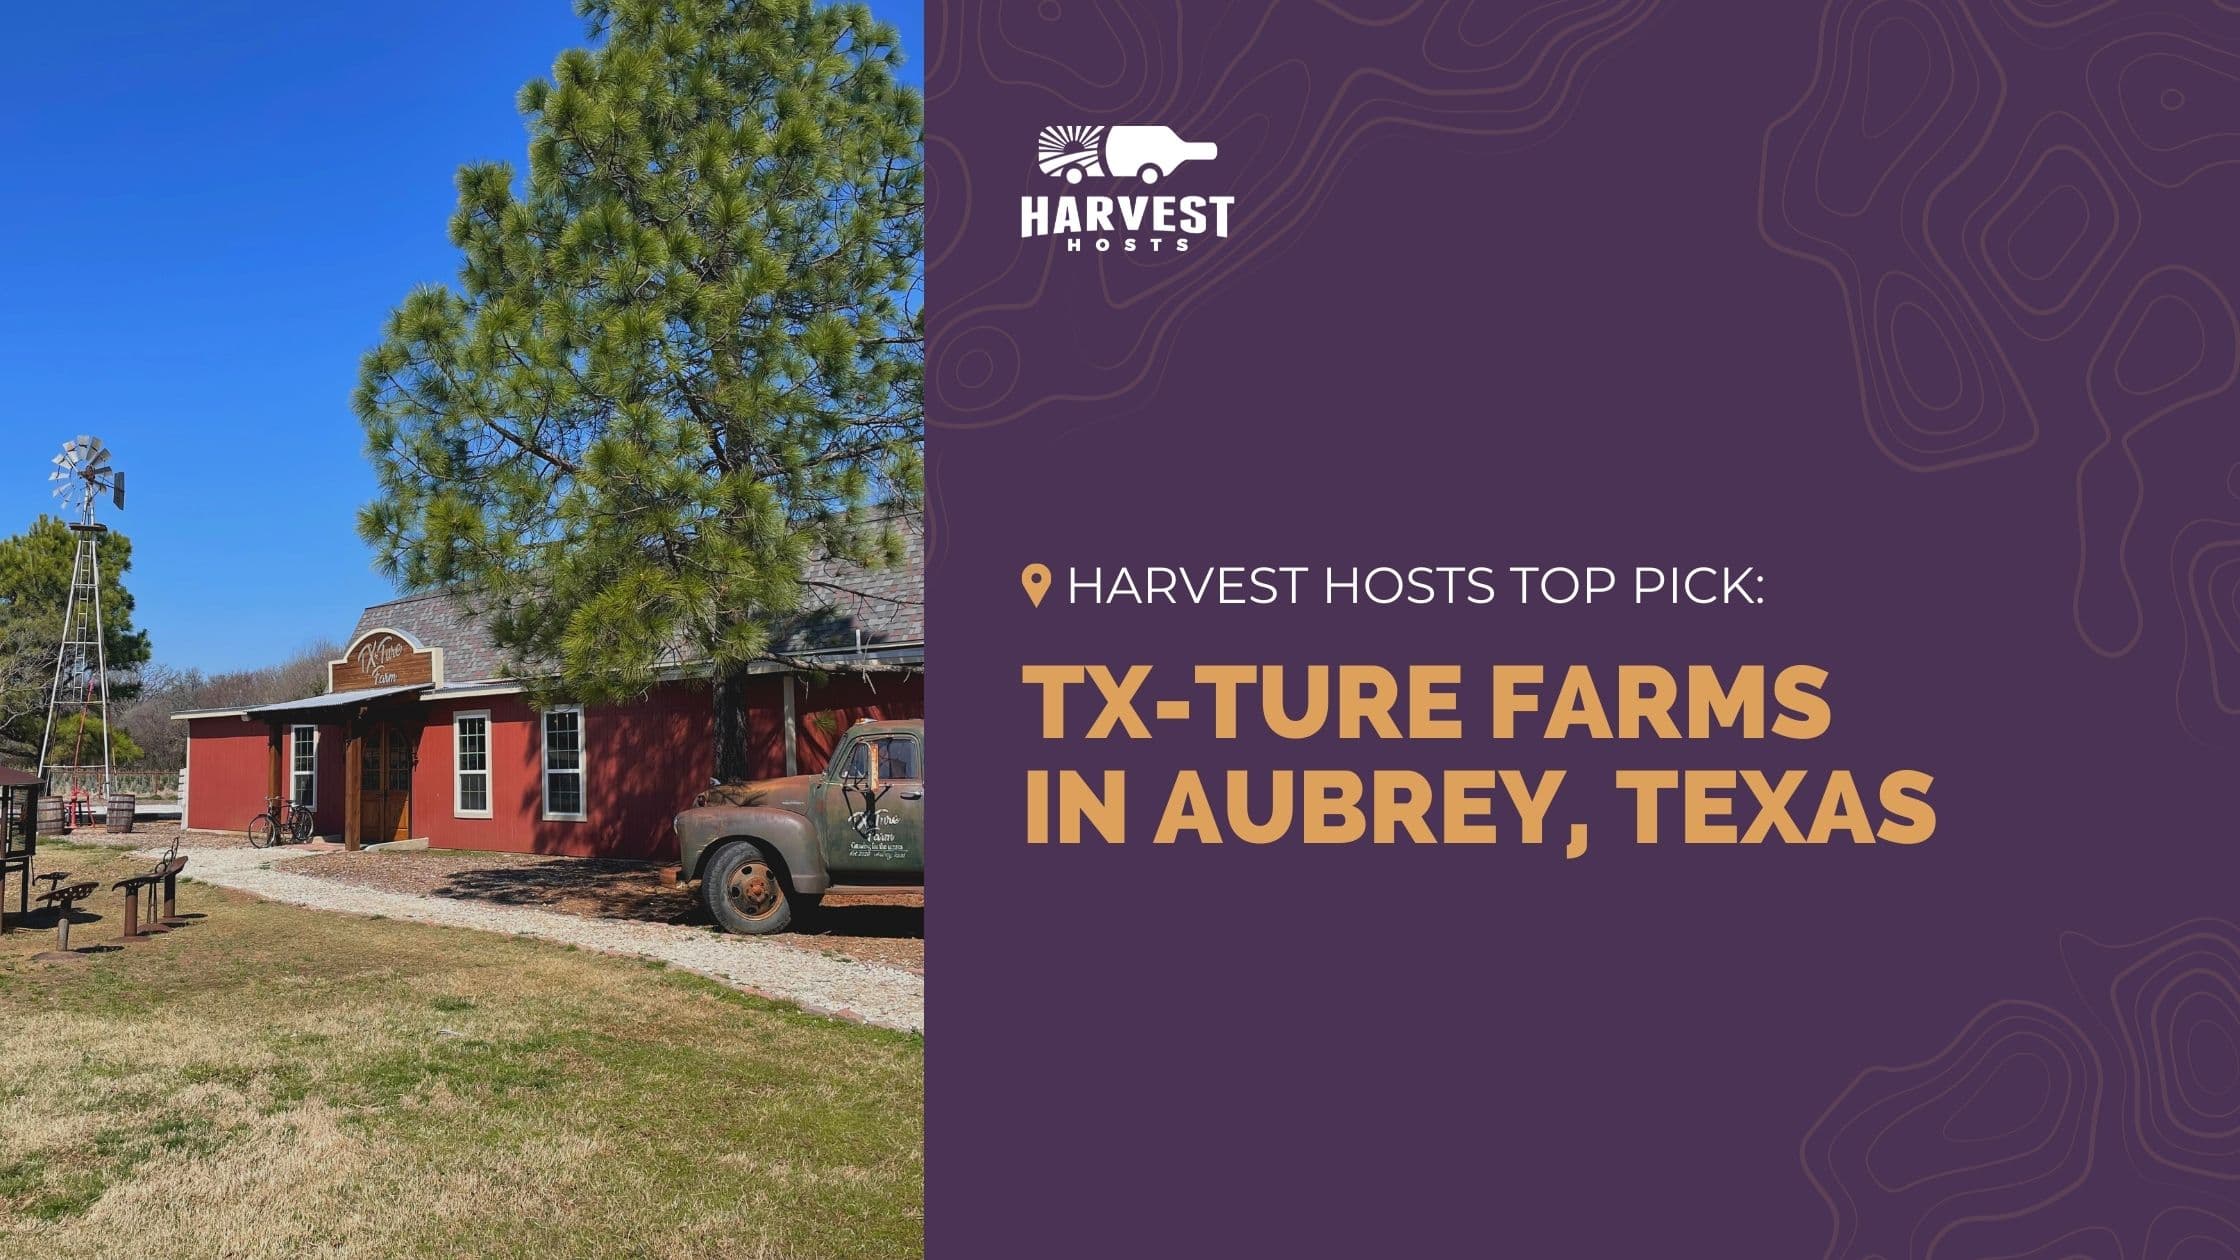 Harvest Hosts Top Pick: TX-Ture Farms in Aubrey, Texas